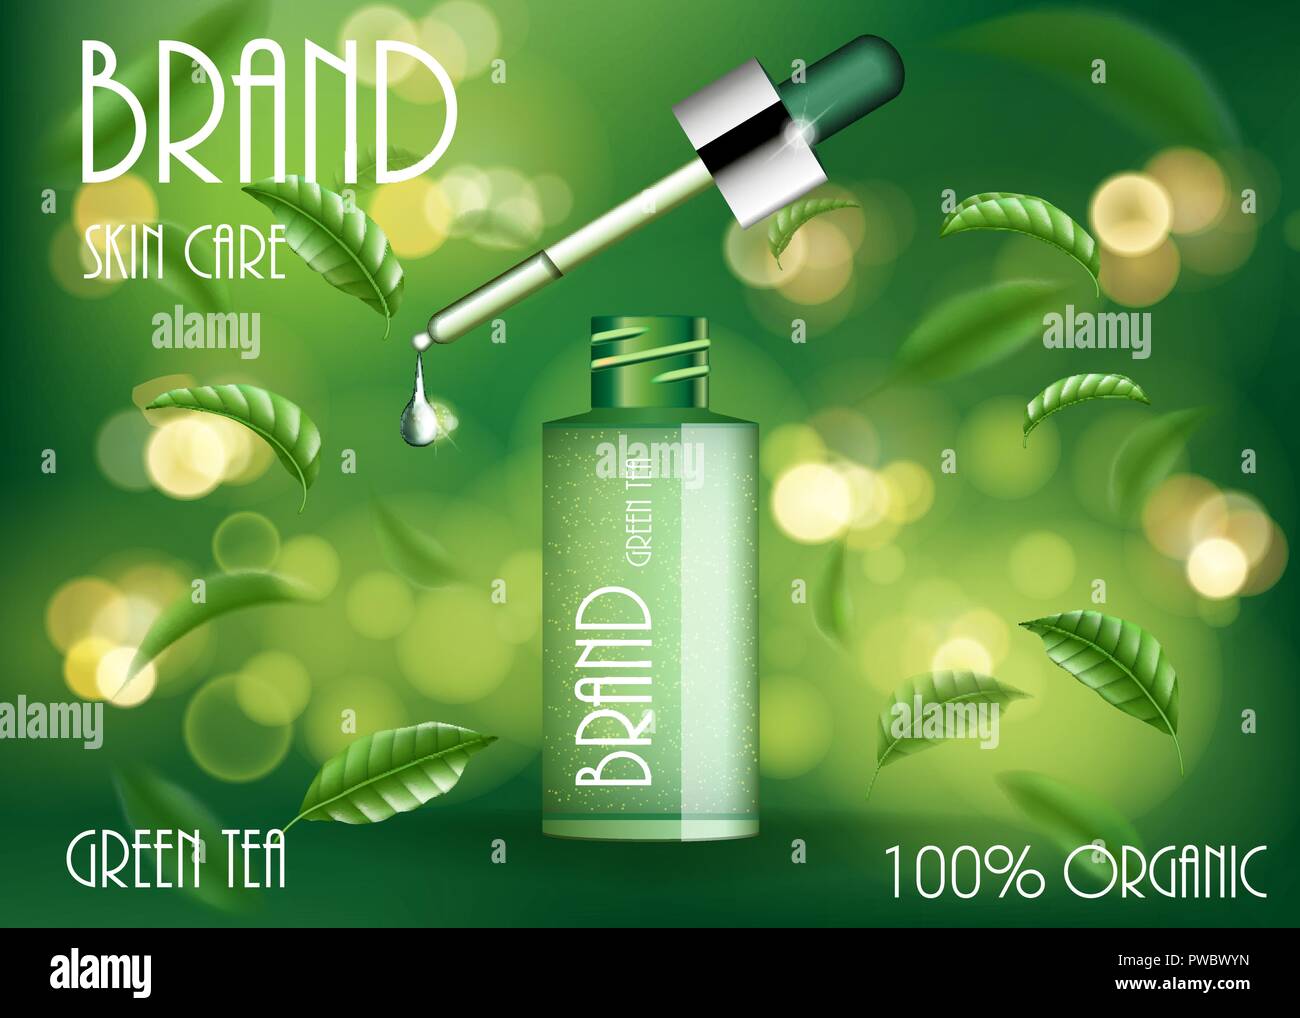 Cosmetic Product Ads Template Green Tea Skin Care Serum Bottle With Tea Leaves And Bokeh 3d Cosmetic Product Design Illustration Stock Vector Image Art Alamy